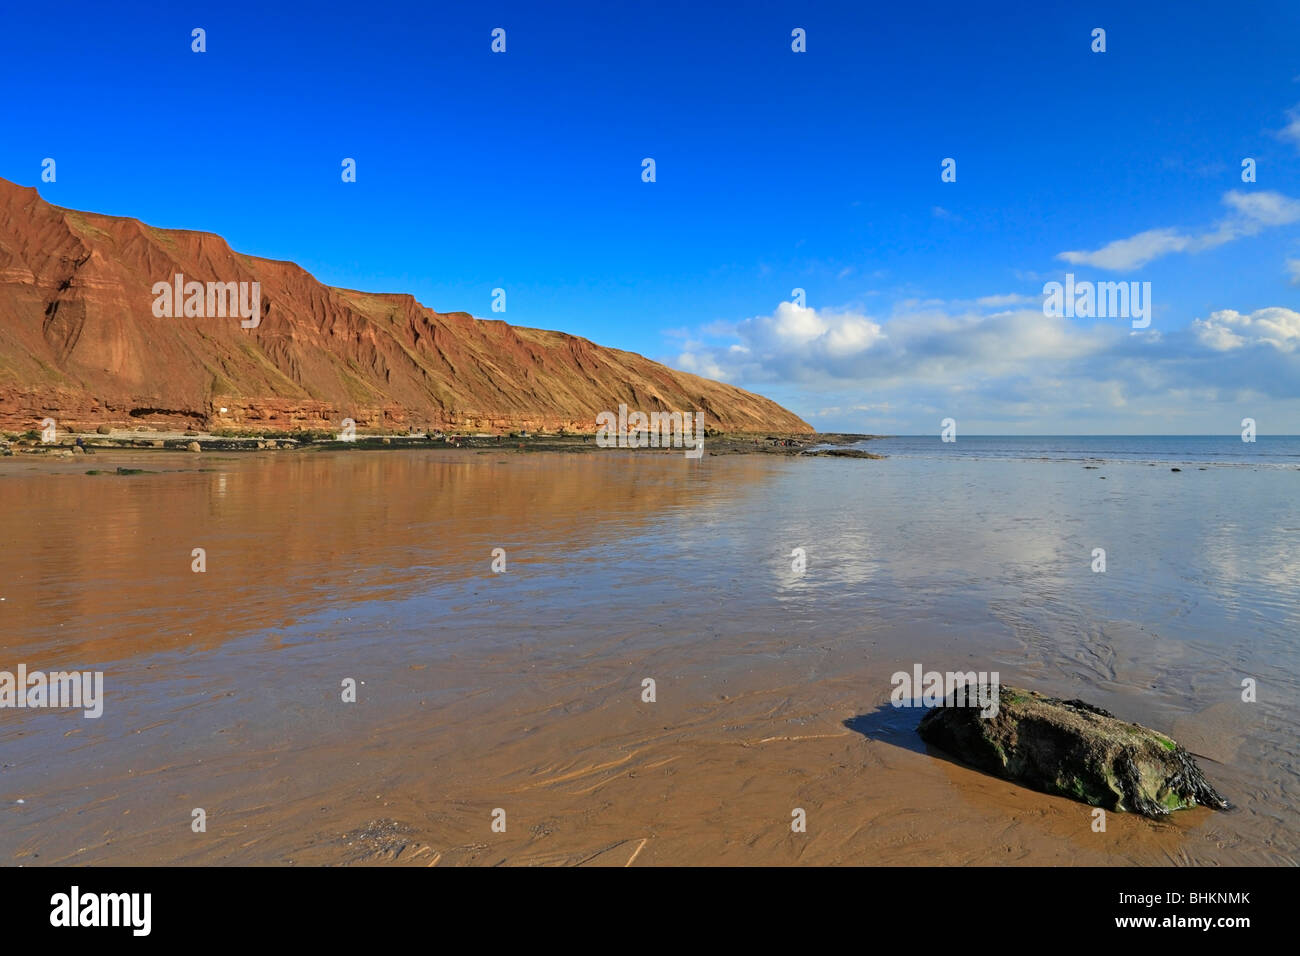 Filey Brigg natural rock promontory from the beach, Filey, North Yorkshire, England, UK. Stock Photo